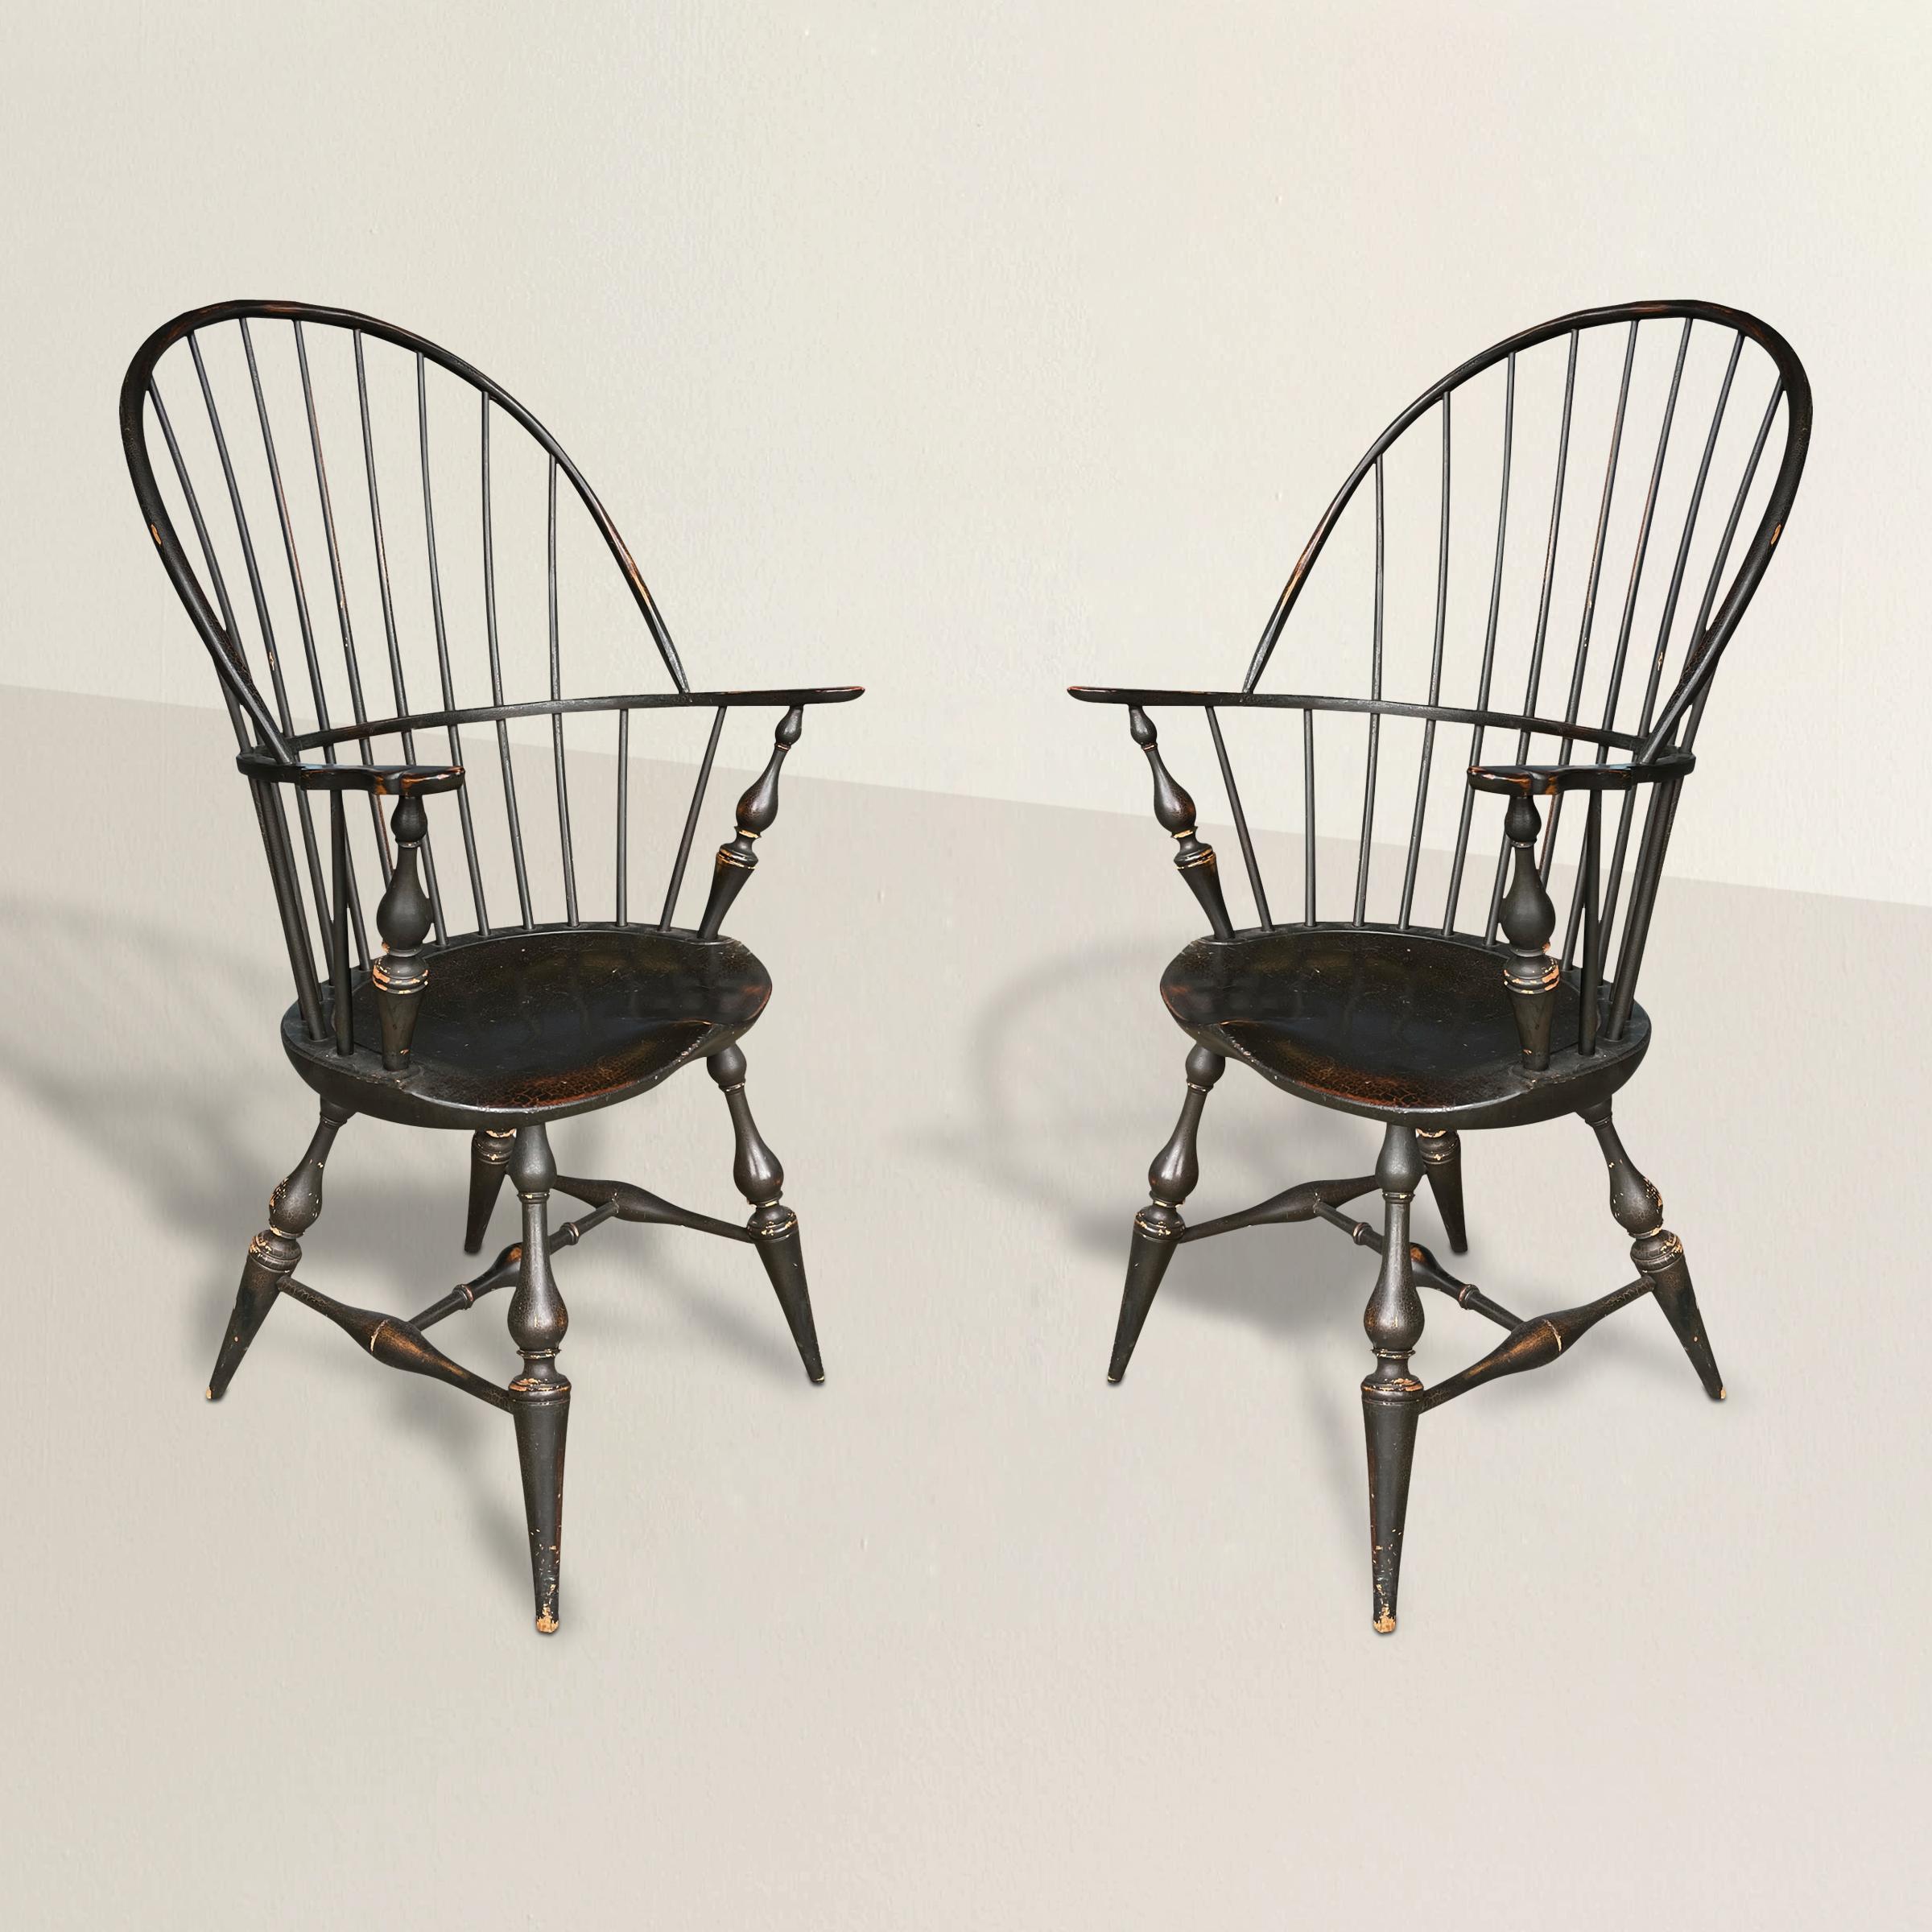 A pair of 20th century American Windsor chairs with continuous hoop backs, saddles seats, turned legs tapering to narrow feet, and their original black painted finishes. Perfect at a dining table, or flanking the fireplace indoor living room.